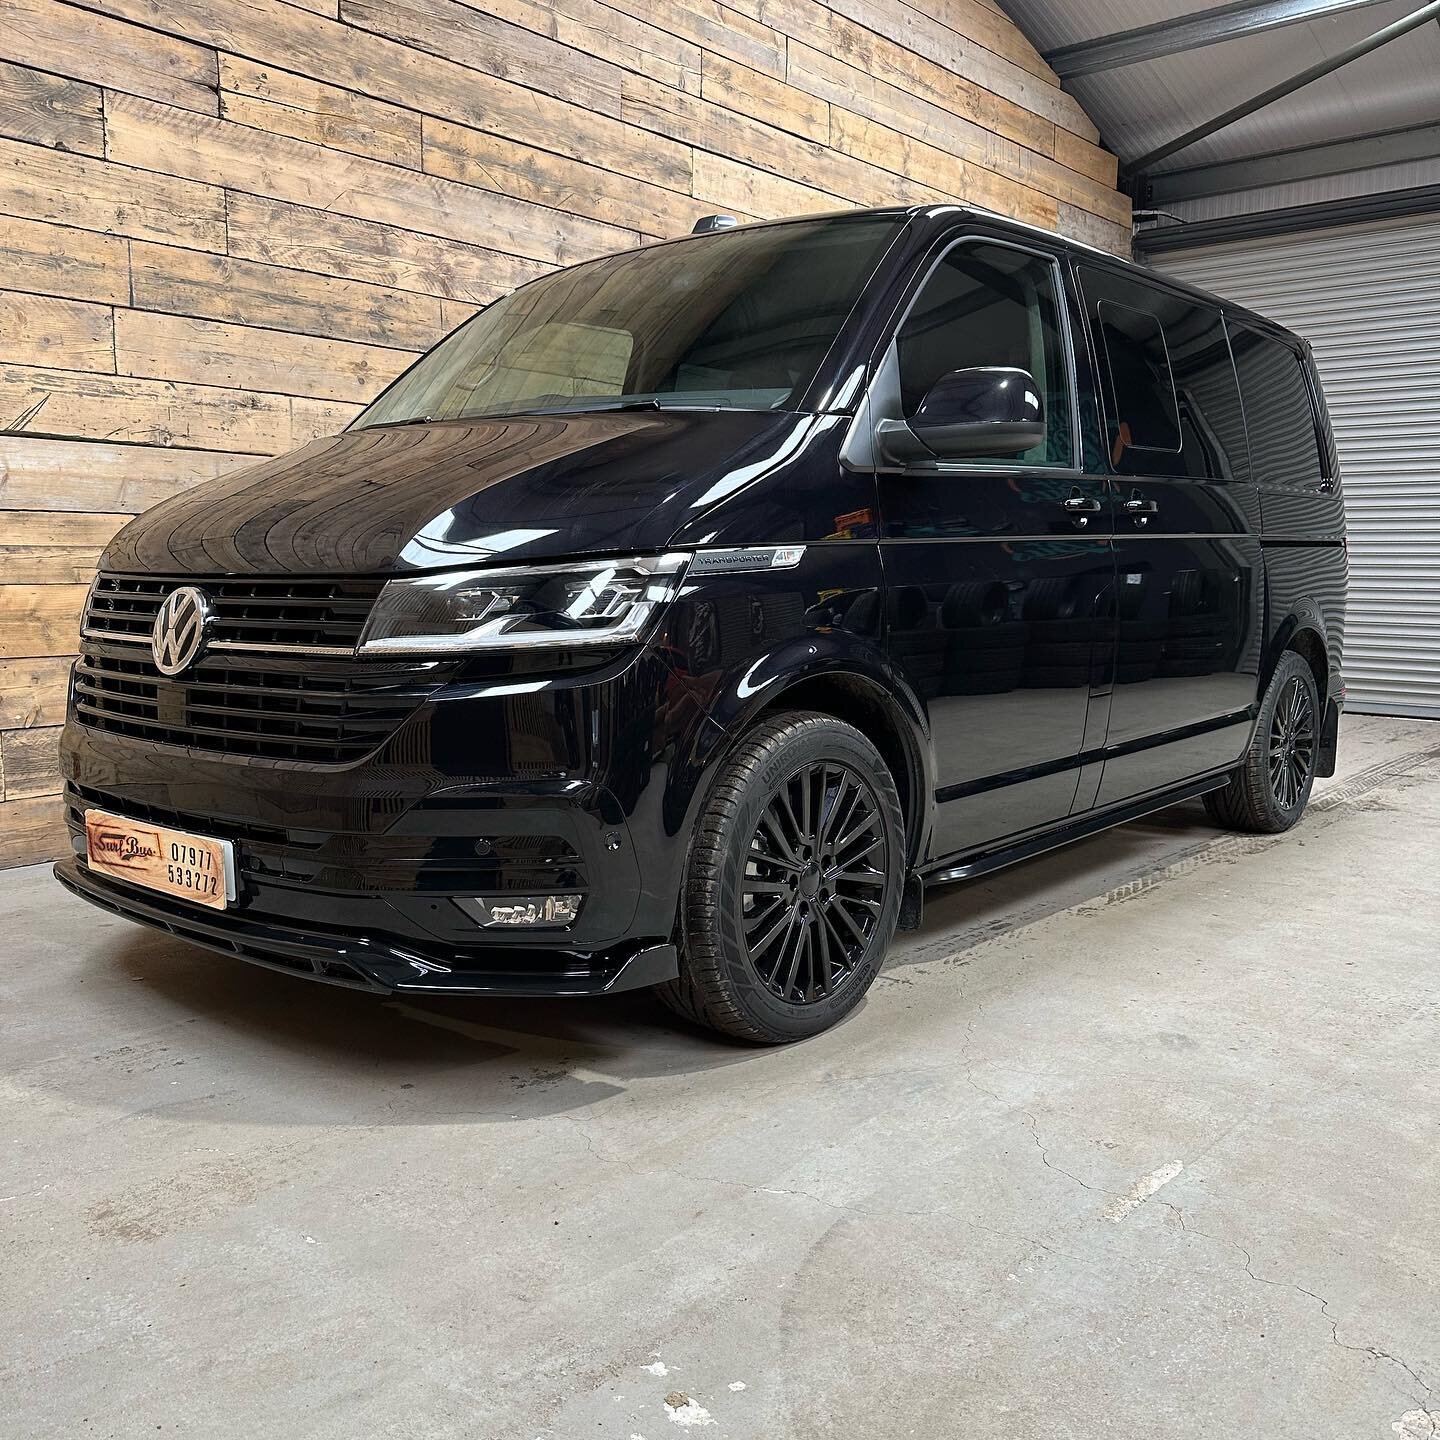 Classic Kombi

A few simple upgrades and this Kombi is now a more pleasurable on the inside and outside.

Exterior
* OEM 35mm Lowering Springs
* 18&quot; Alloys
* Hex Side Bars
* Gloss Black Lower Splitter
* Gloss Grills
* Sportline Tailgate Spoiler
